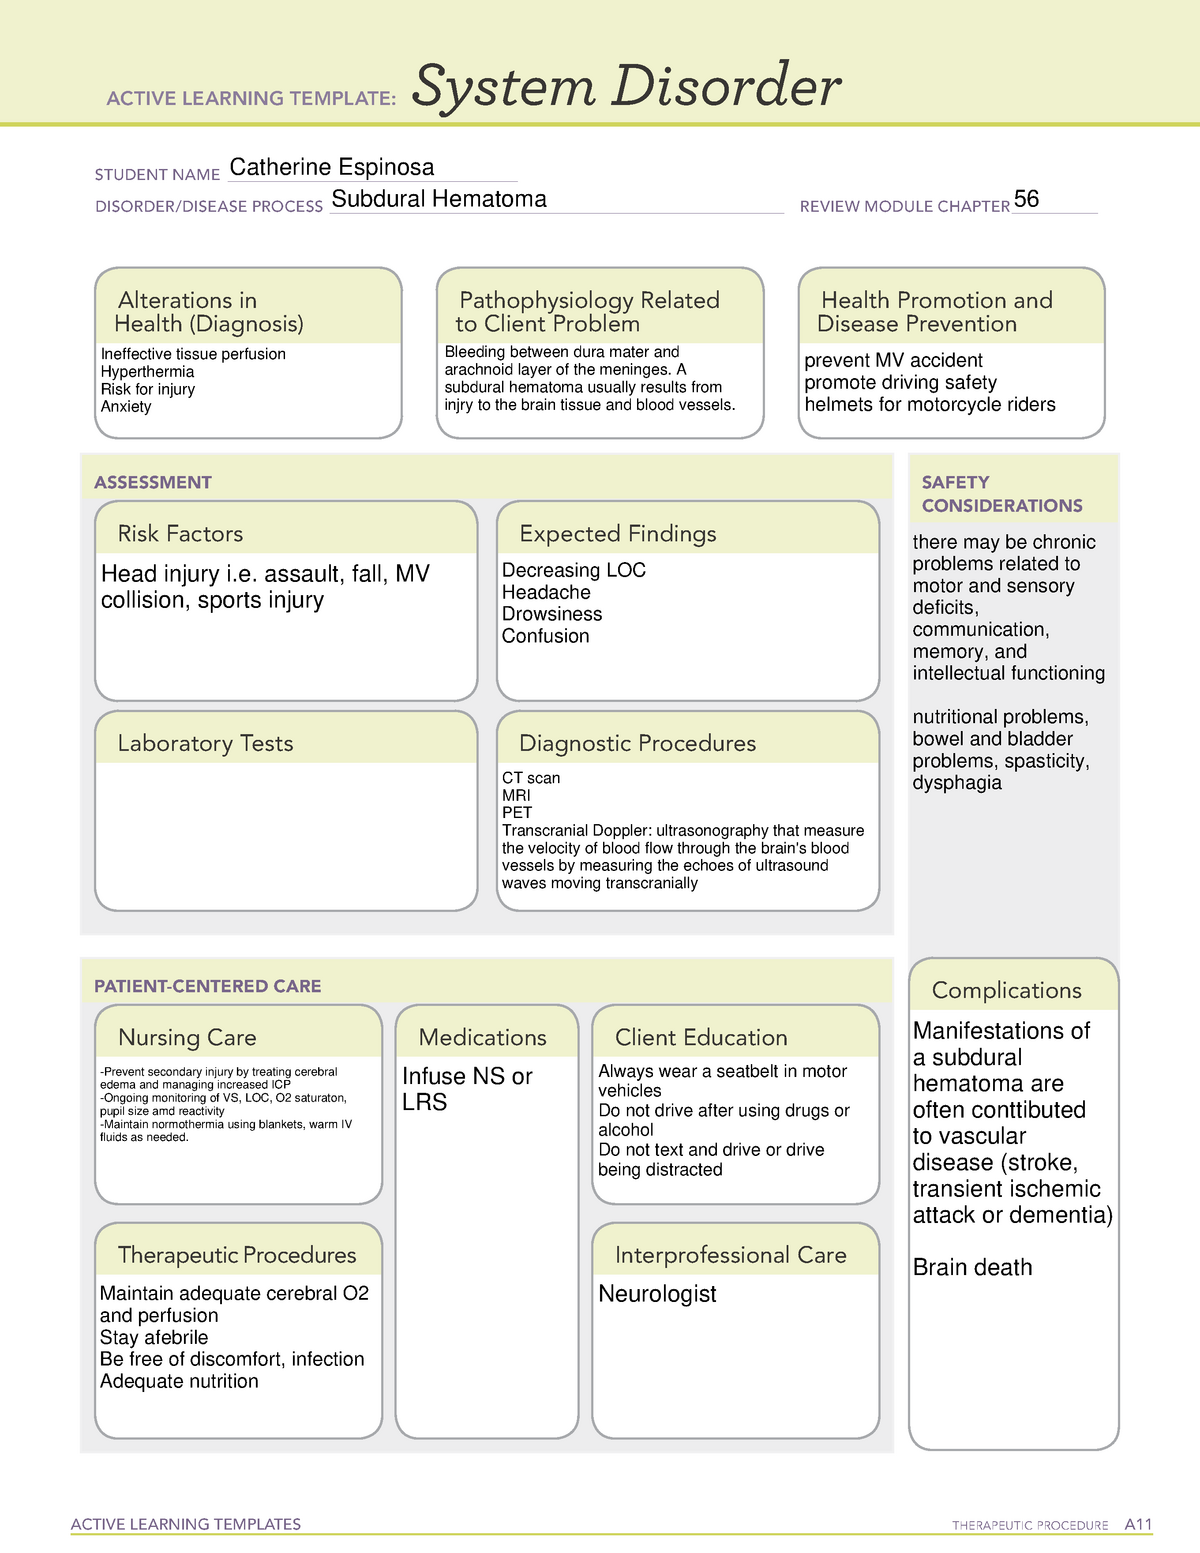 subdural-hematoma-system-disorder-active-learning-templates